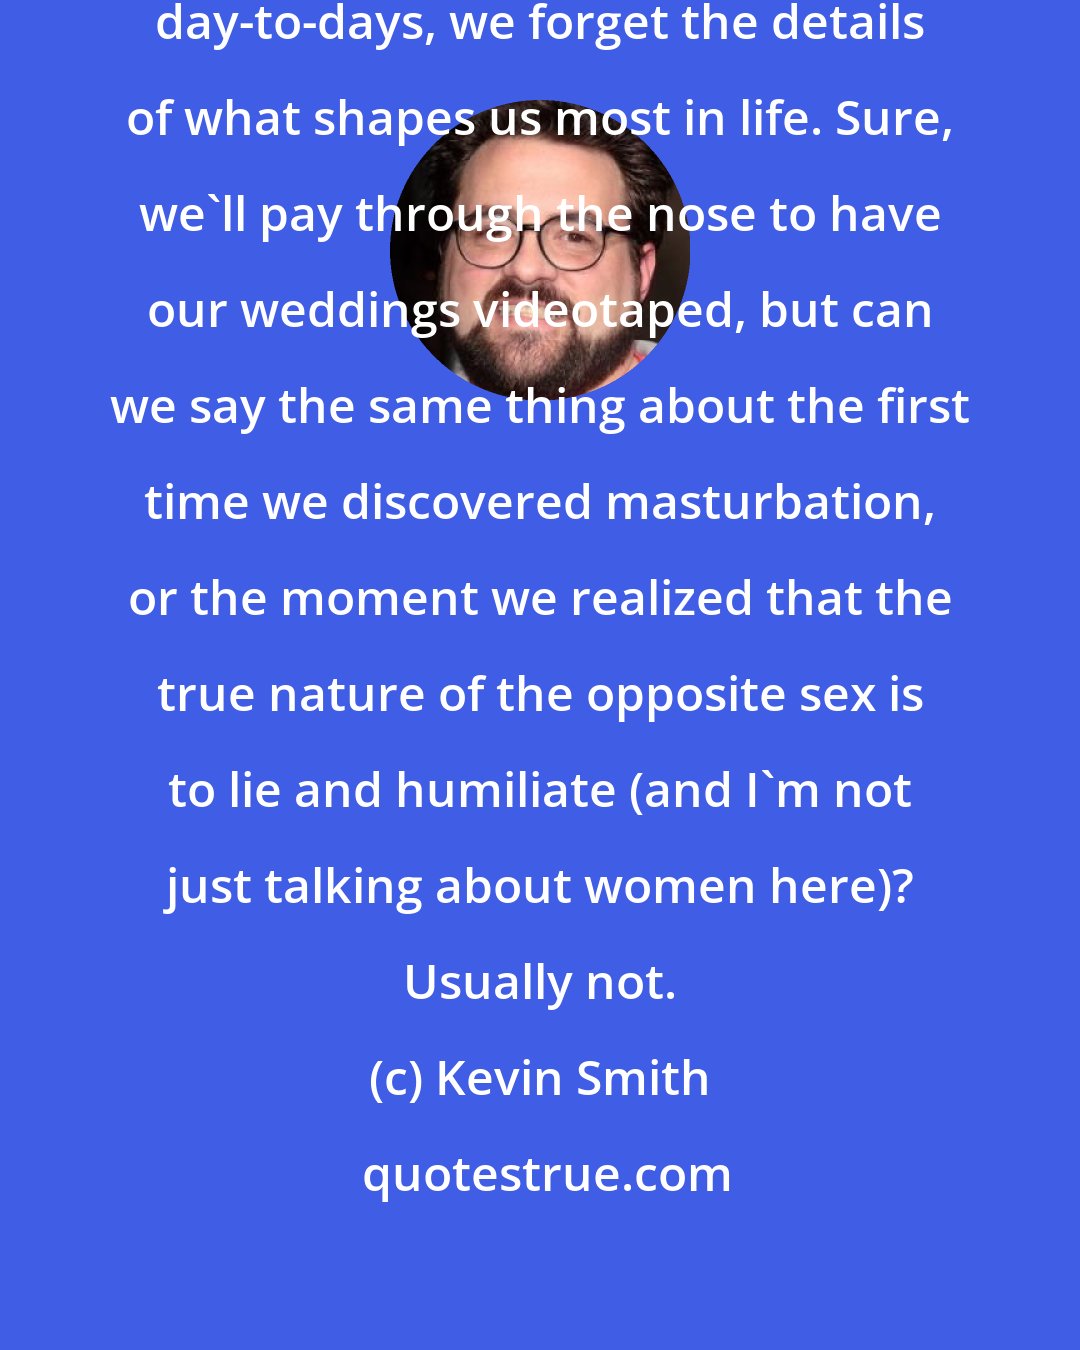 Kevin Smith: So often, over the course of our day-to-days, we forget the details of what shapes us most in life. Sure, we'll pay through the nose to have our weddings videotaped, but can we say the same thing about the first time we discovered masturbation, or the moment we realized that the true nature of the opposite sex is to lie and humiliate (and I'm not just talking about women here)? Usually not.